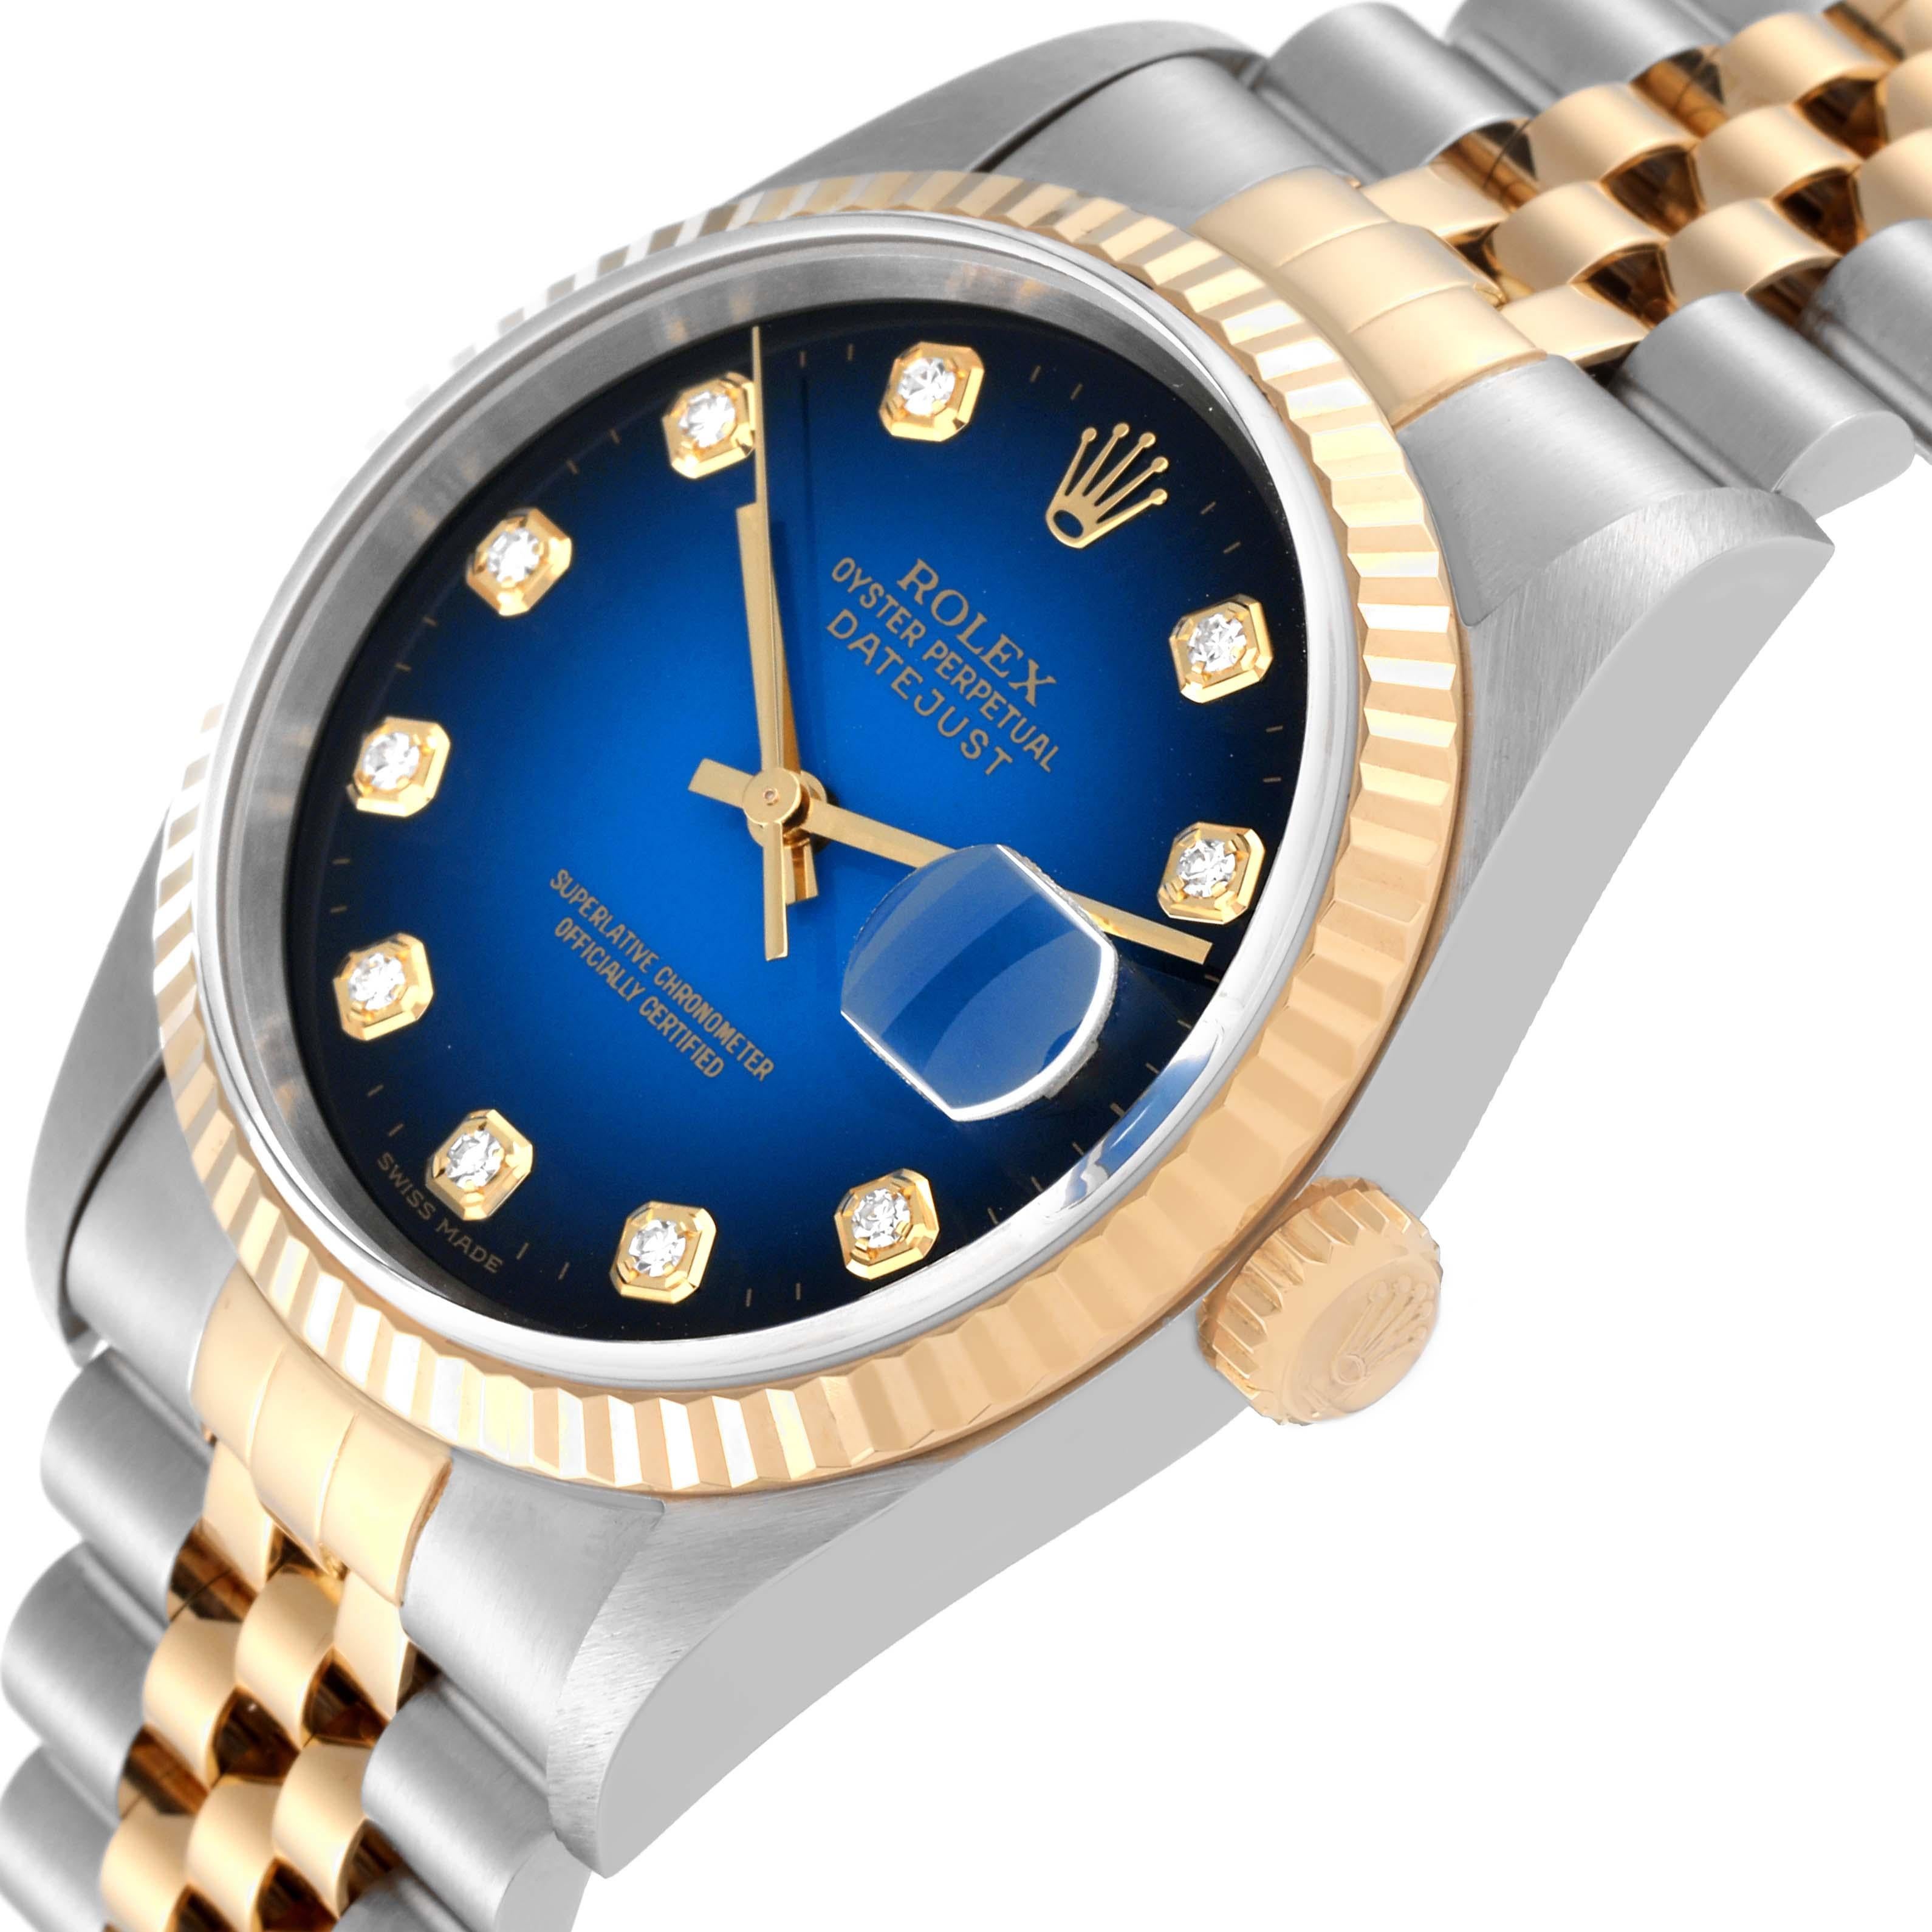 Rolex Datejust Blue Diamond Dial Steel Yellow Gold Mens Watch 16233 Box Papers 1